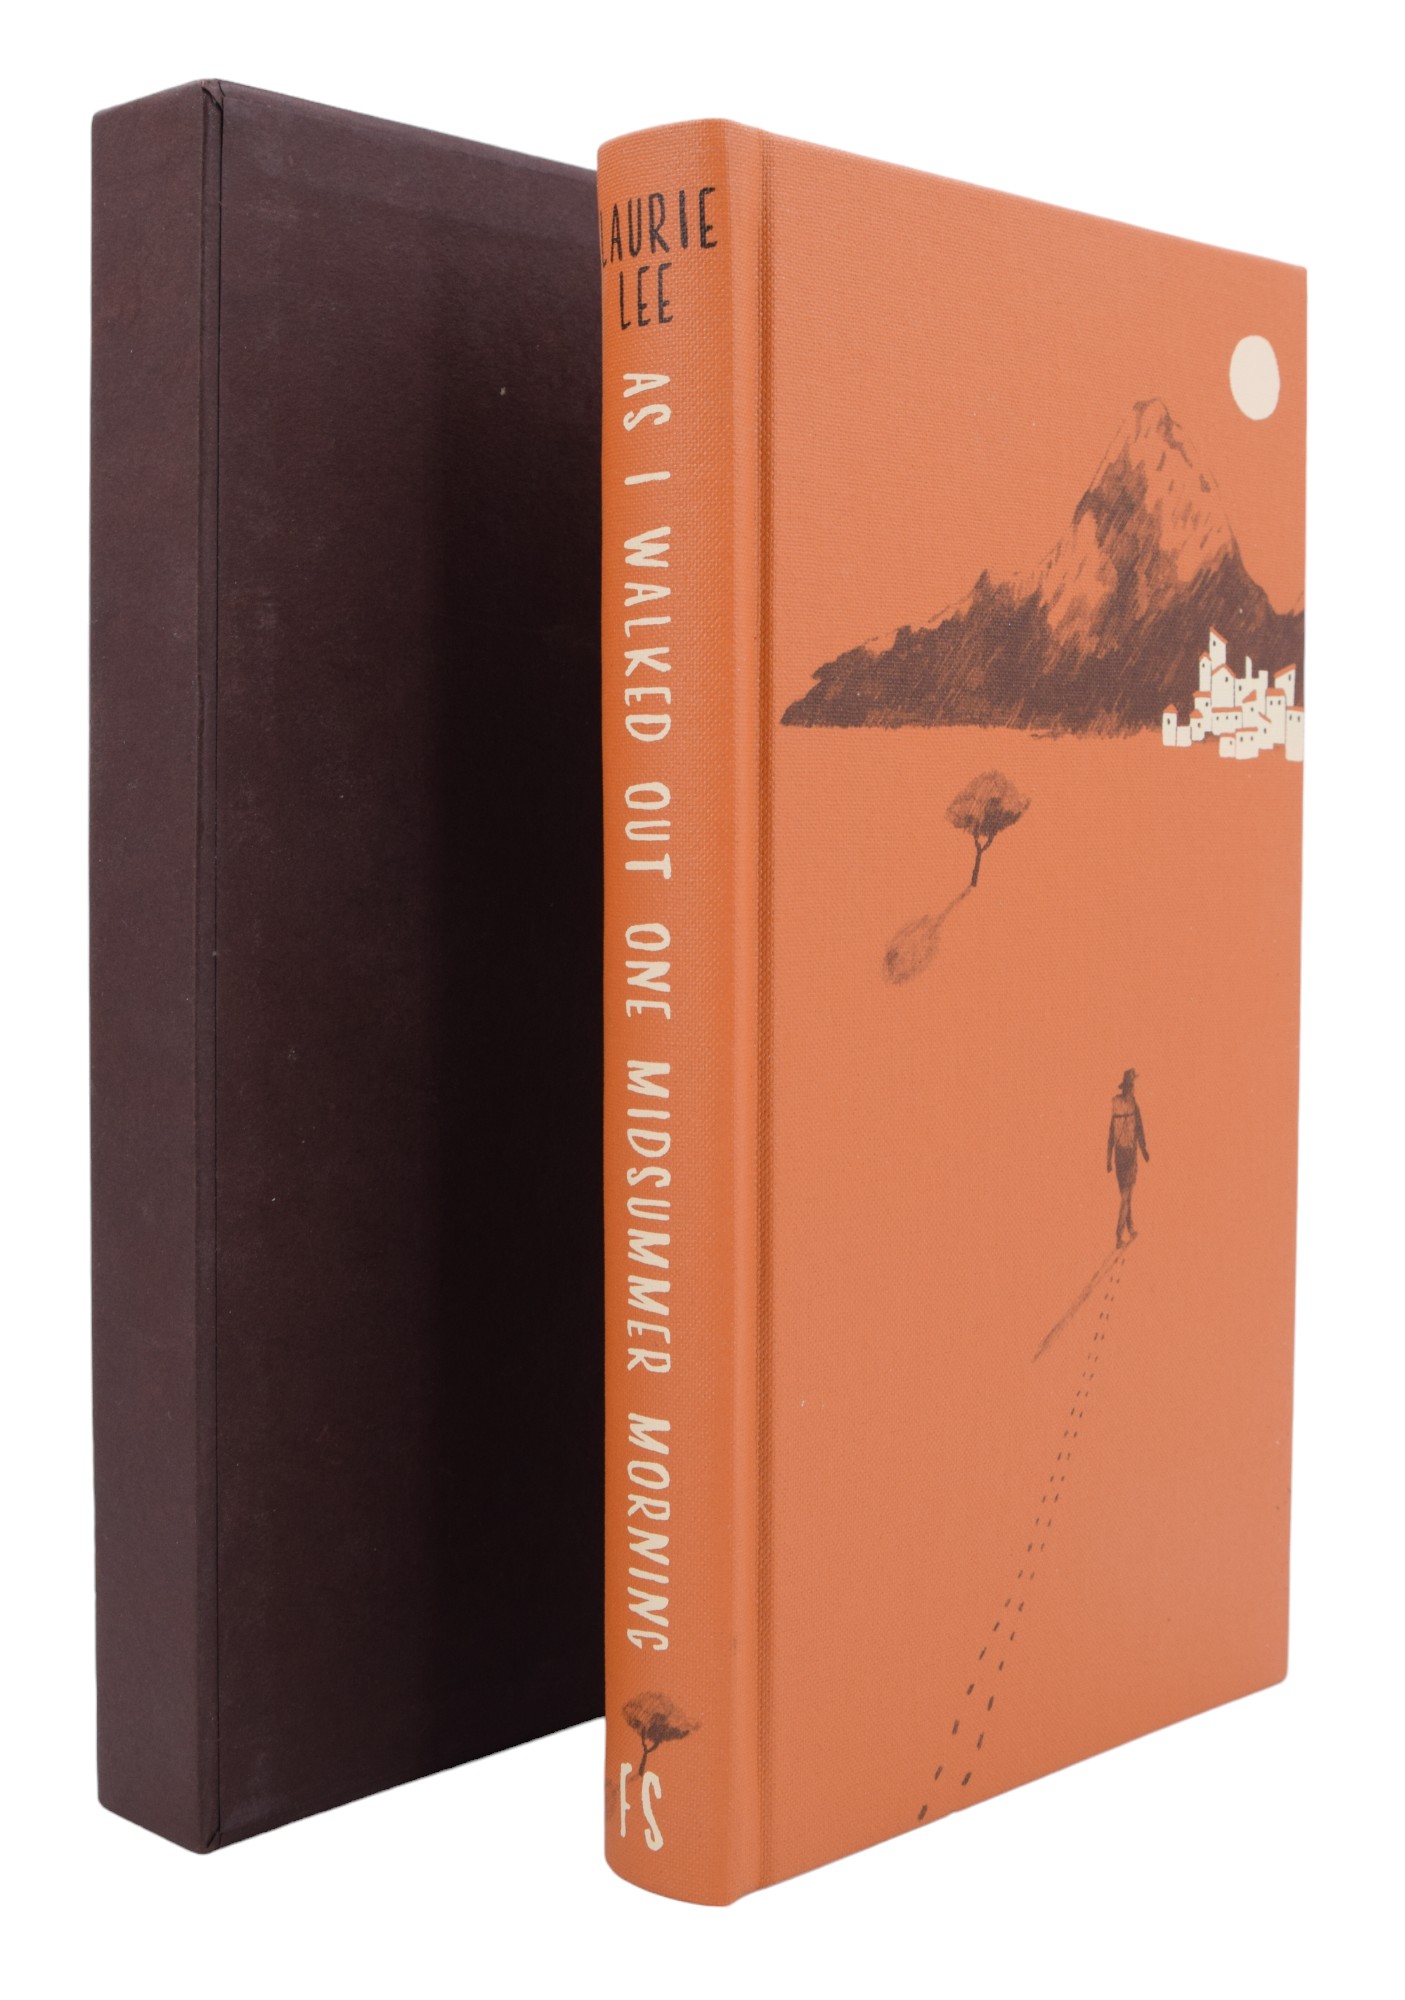 Seven Folio Society publications in slip cases, including Frances Wood, "The Silk Road", 2002; - Image 26 of 31